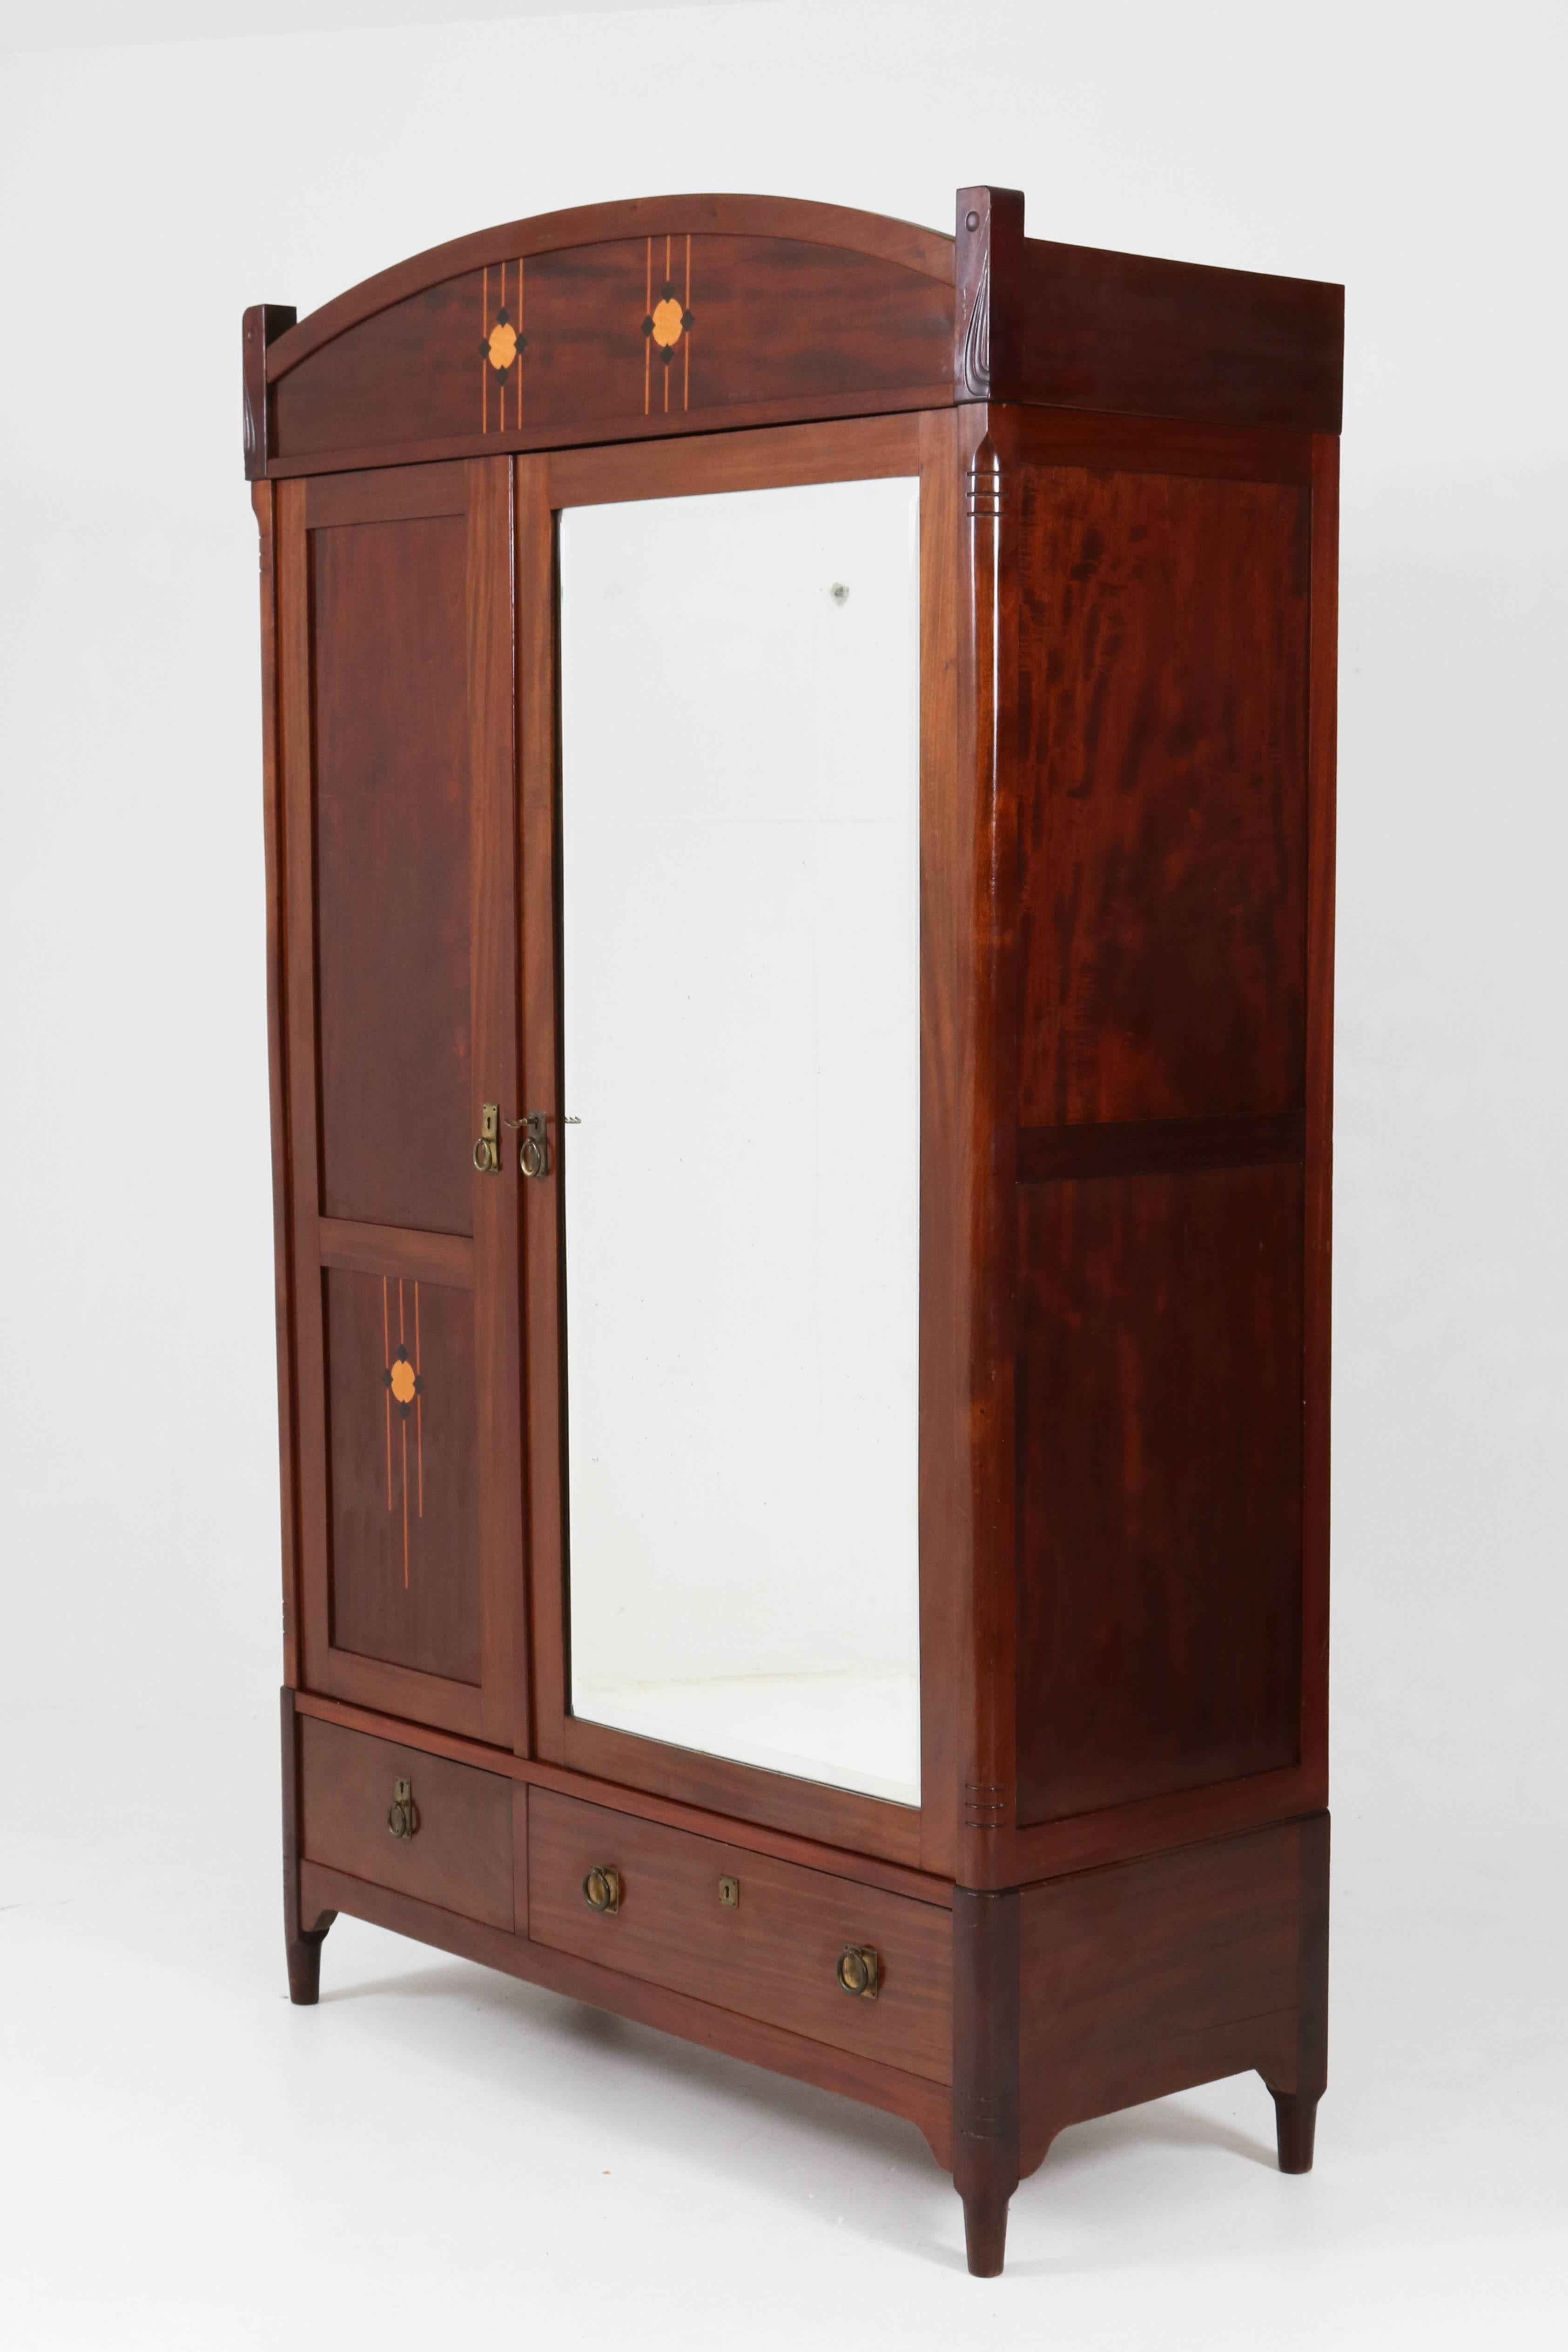 Stunning Dutch Art Nouveau wardrobe or armoir by H.Pander, 1900s.
Solid mahogany with stylish inlay on top and left door.
Solid brass handles on doors and drawers.
Original beveled glass mirror.
Three adjustable wooden shelves.
In good original